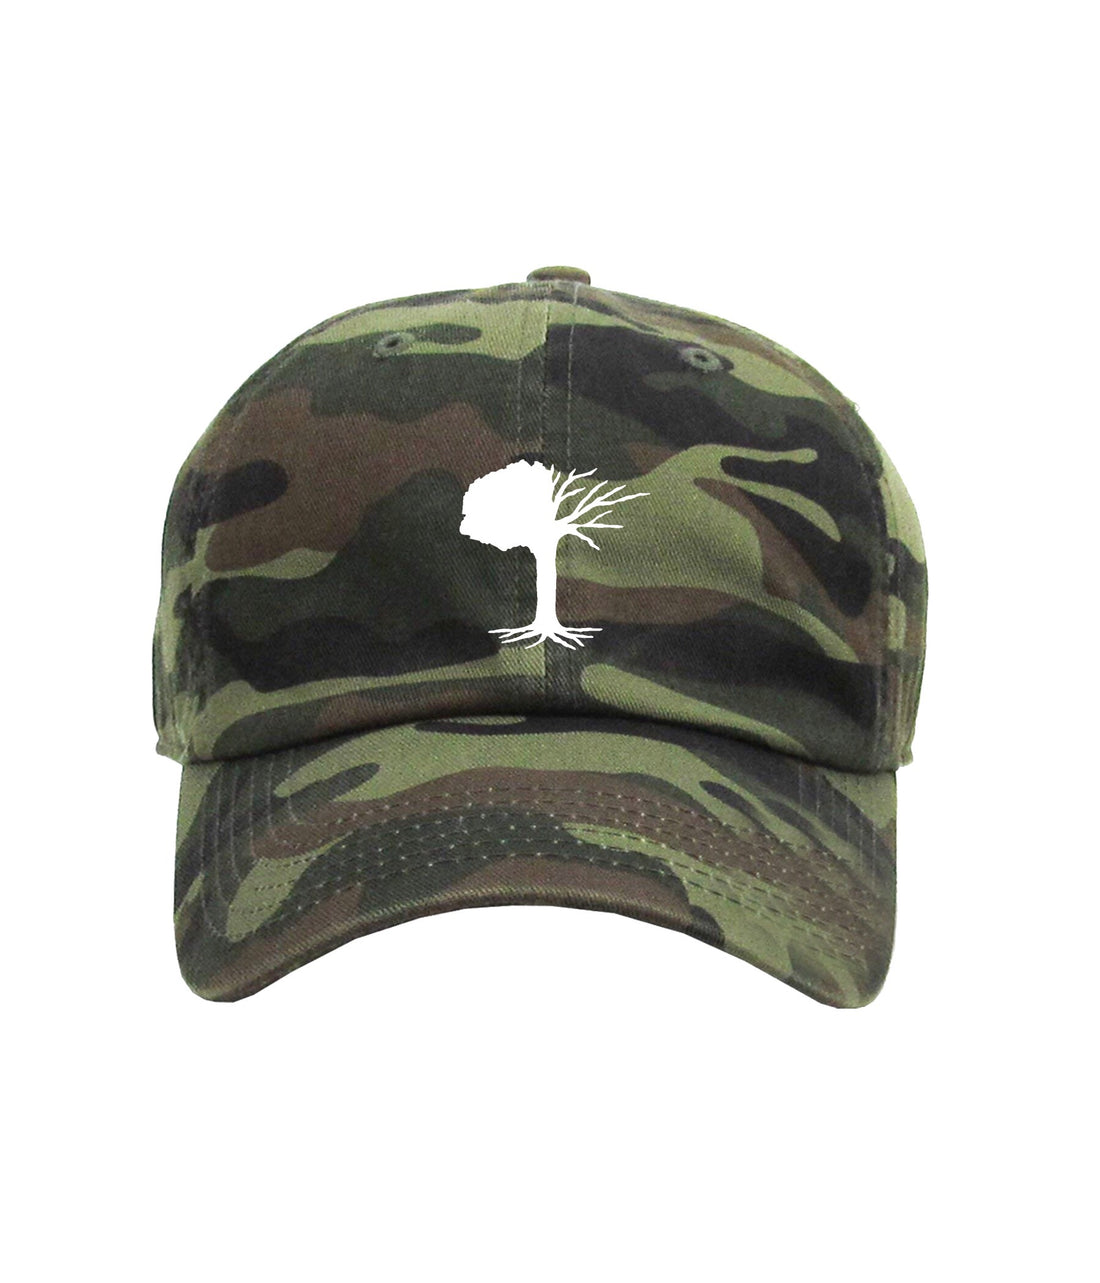 STEM Classic Sports Cap (Limited Camo Edition) - STEM Clothing Group